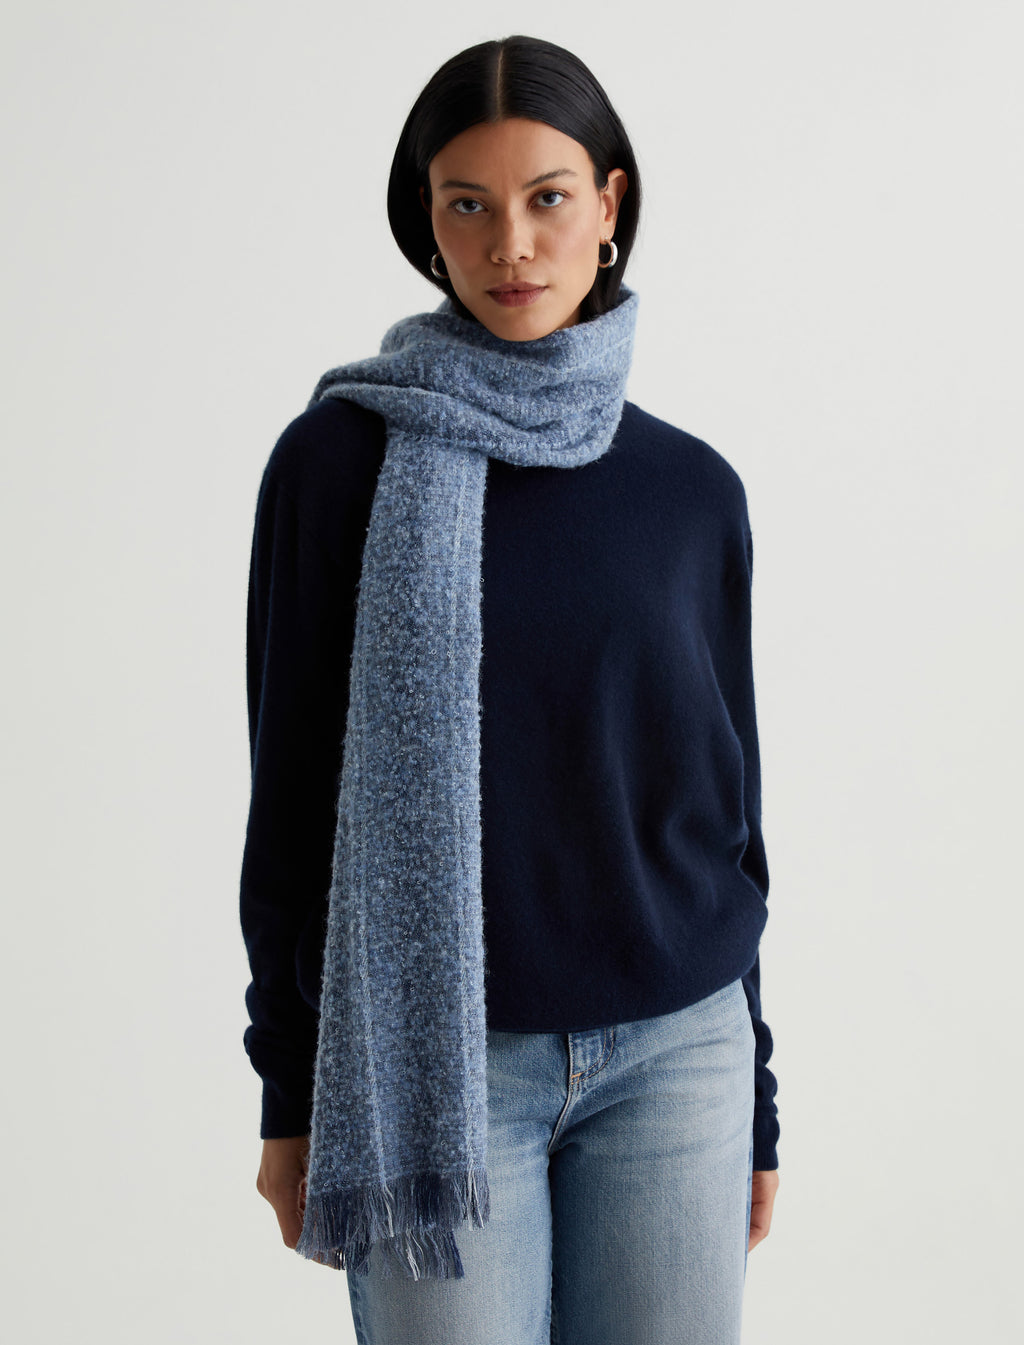 Accessory Arden AG Jeans Official Wool Store Scarf Indigo at Stripe